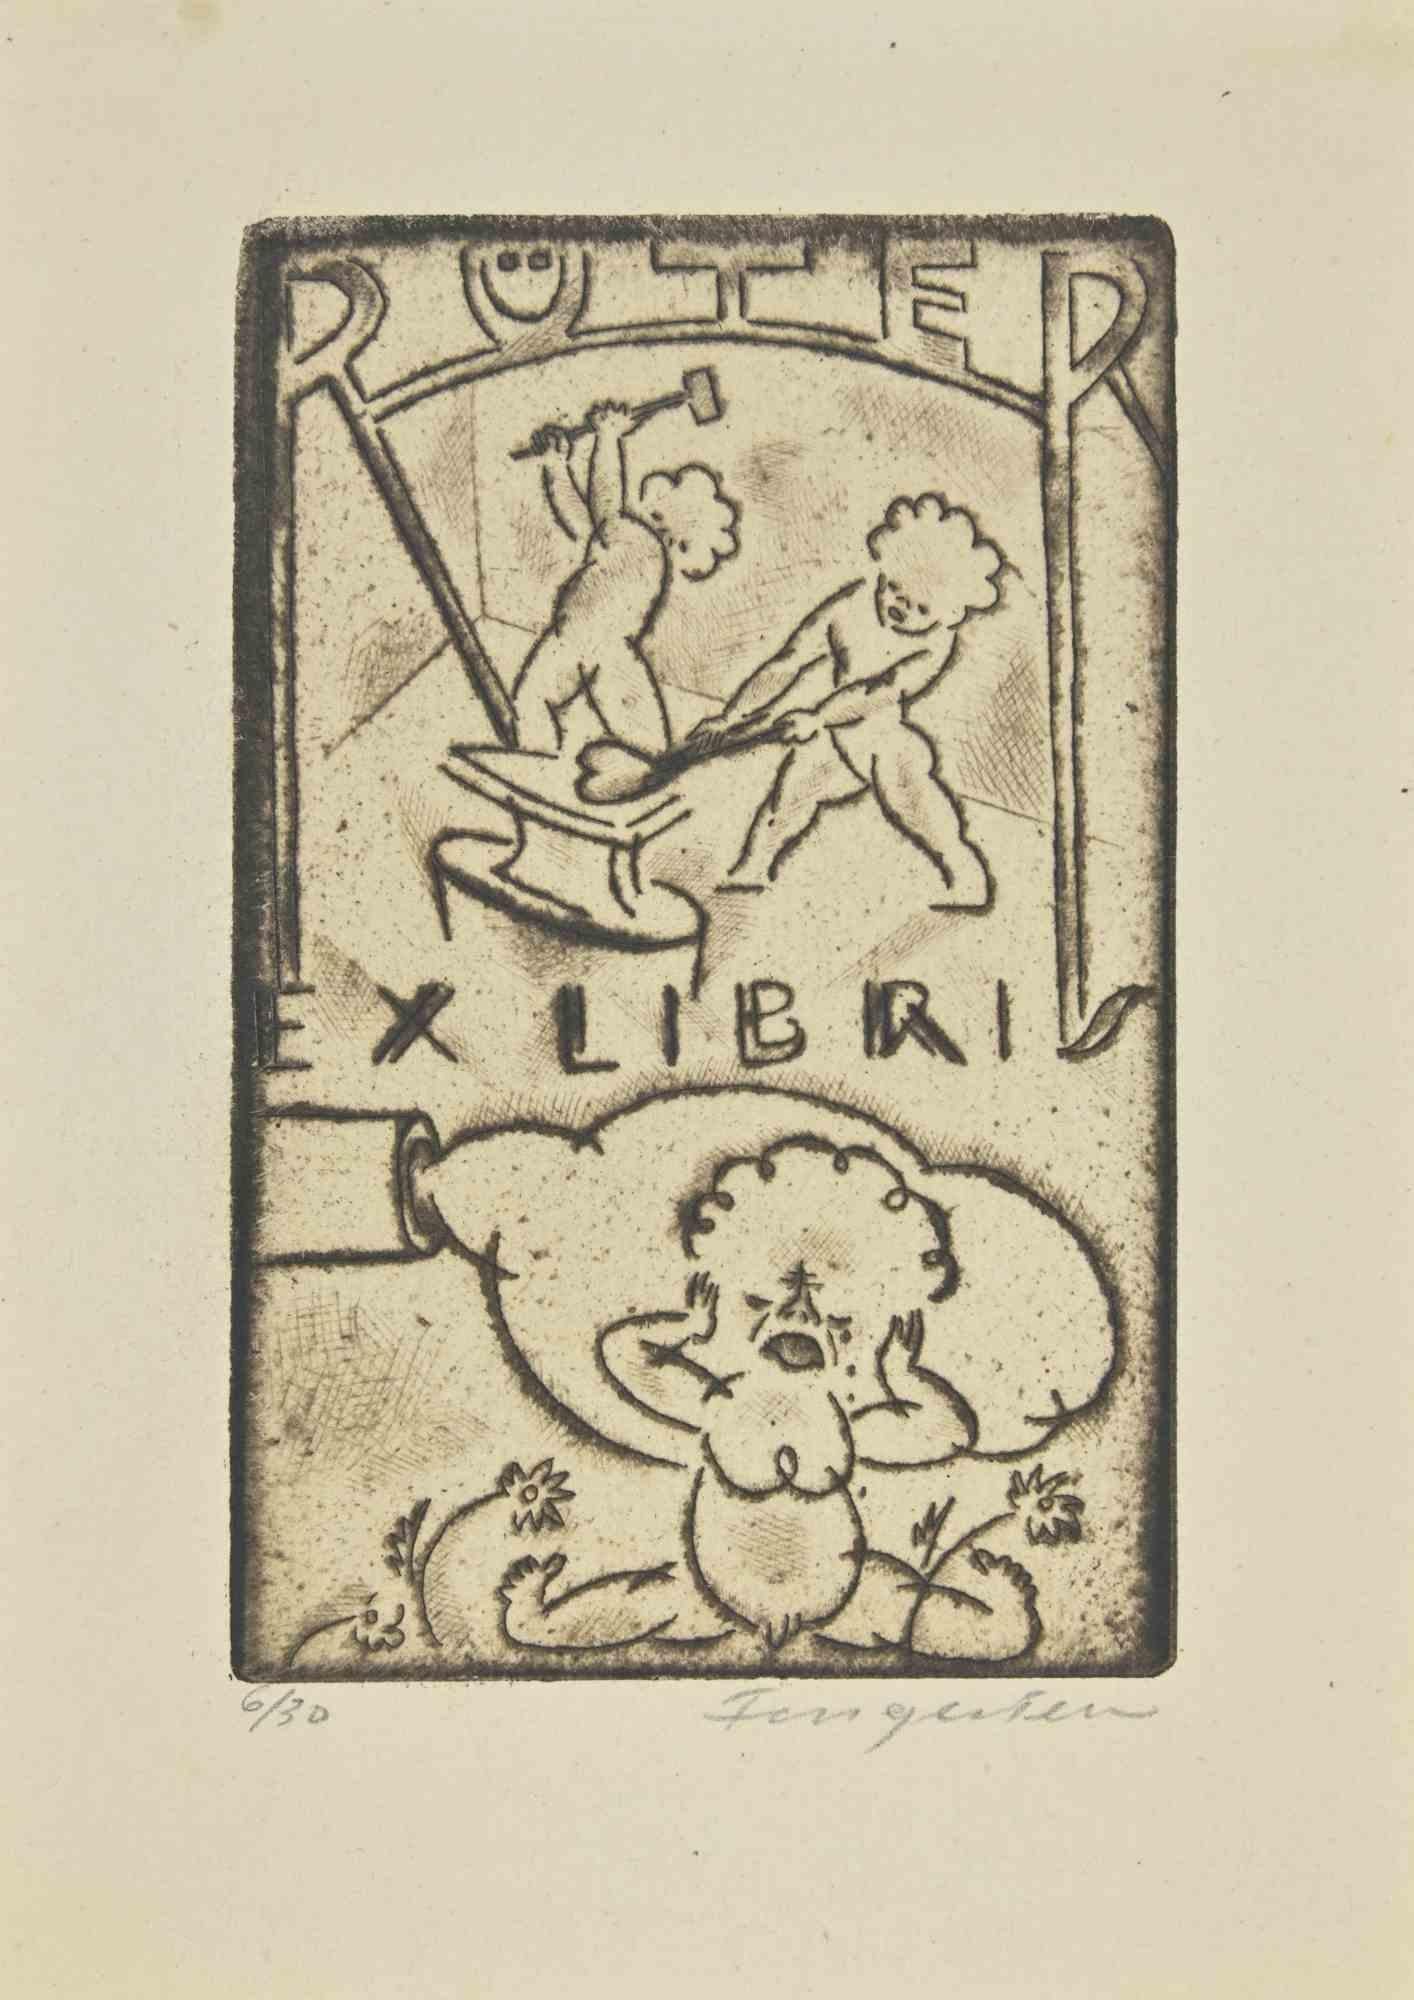 Ex Libris - Ruter is a Woodcut print created by  Michel Fingesten.

Hand Signed on the lower right margin. Numbered on the left corner, ex. n. 6/30

Very good condition.

Michel Fingesten (1884 - 1943) was a Czech painter and engraver of Jewish